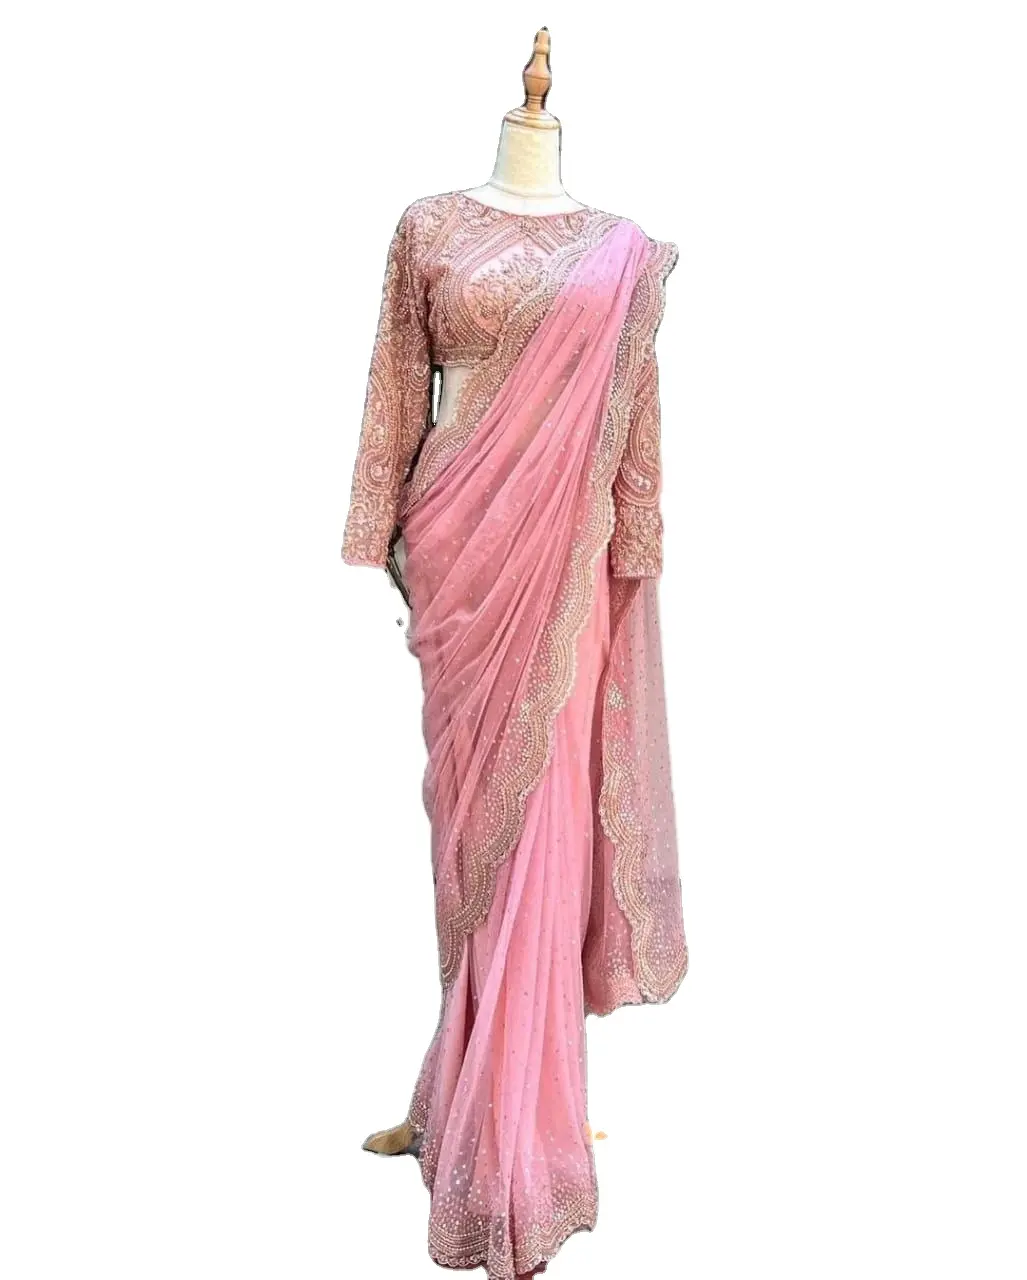 New Arrival Ethnic Party Wear Floral Printed Soft Satin Crepe Silk Saree With Heavy Silk Blouse